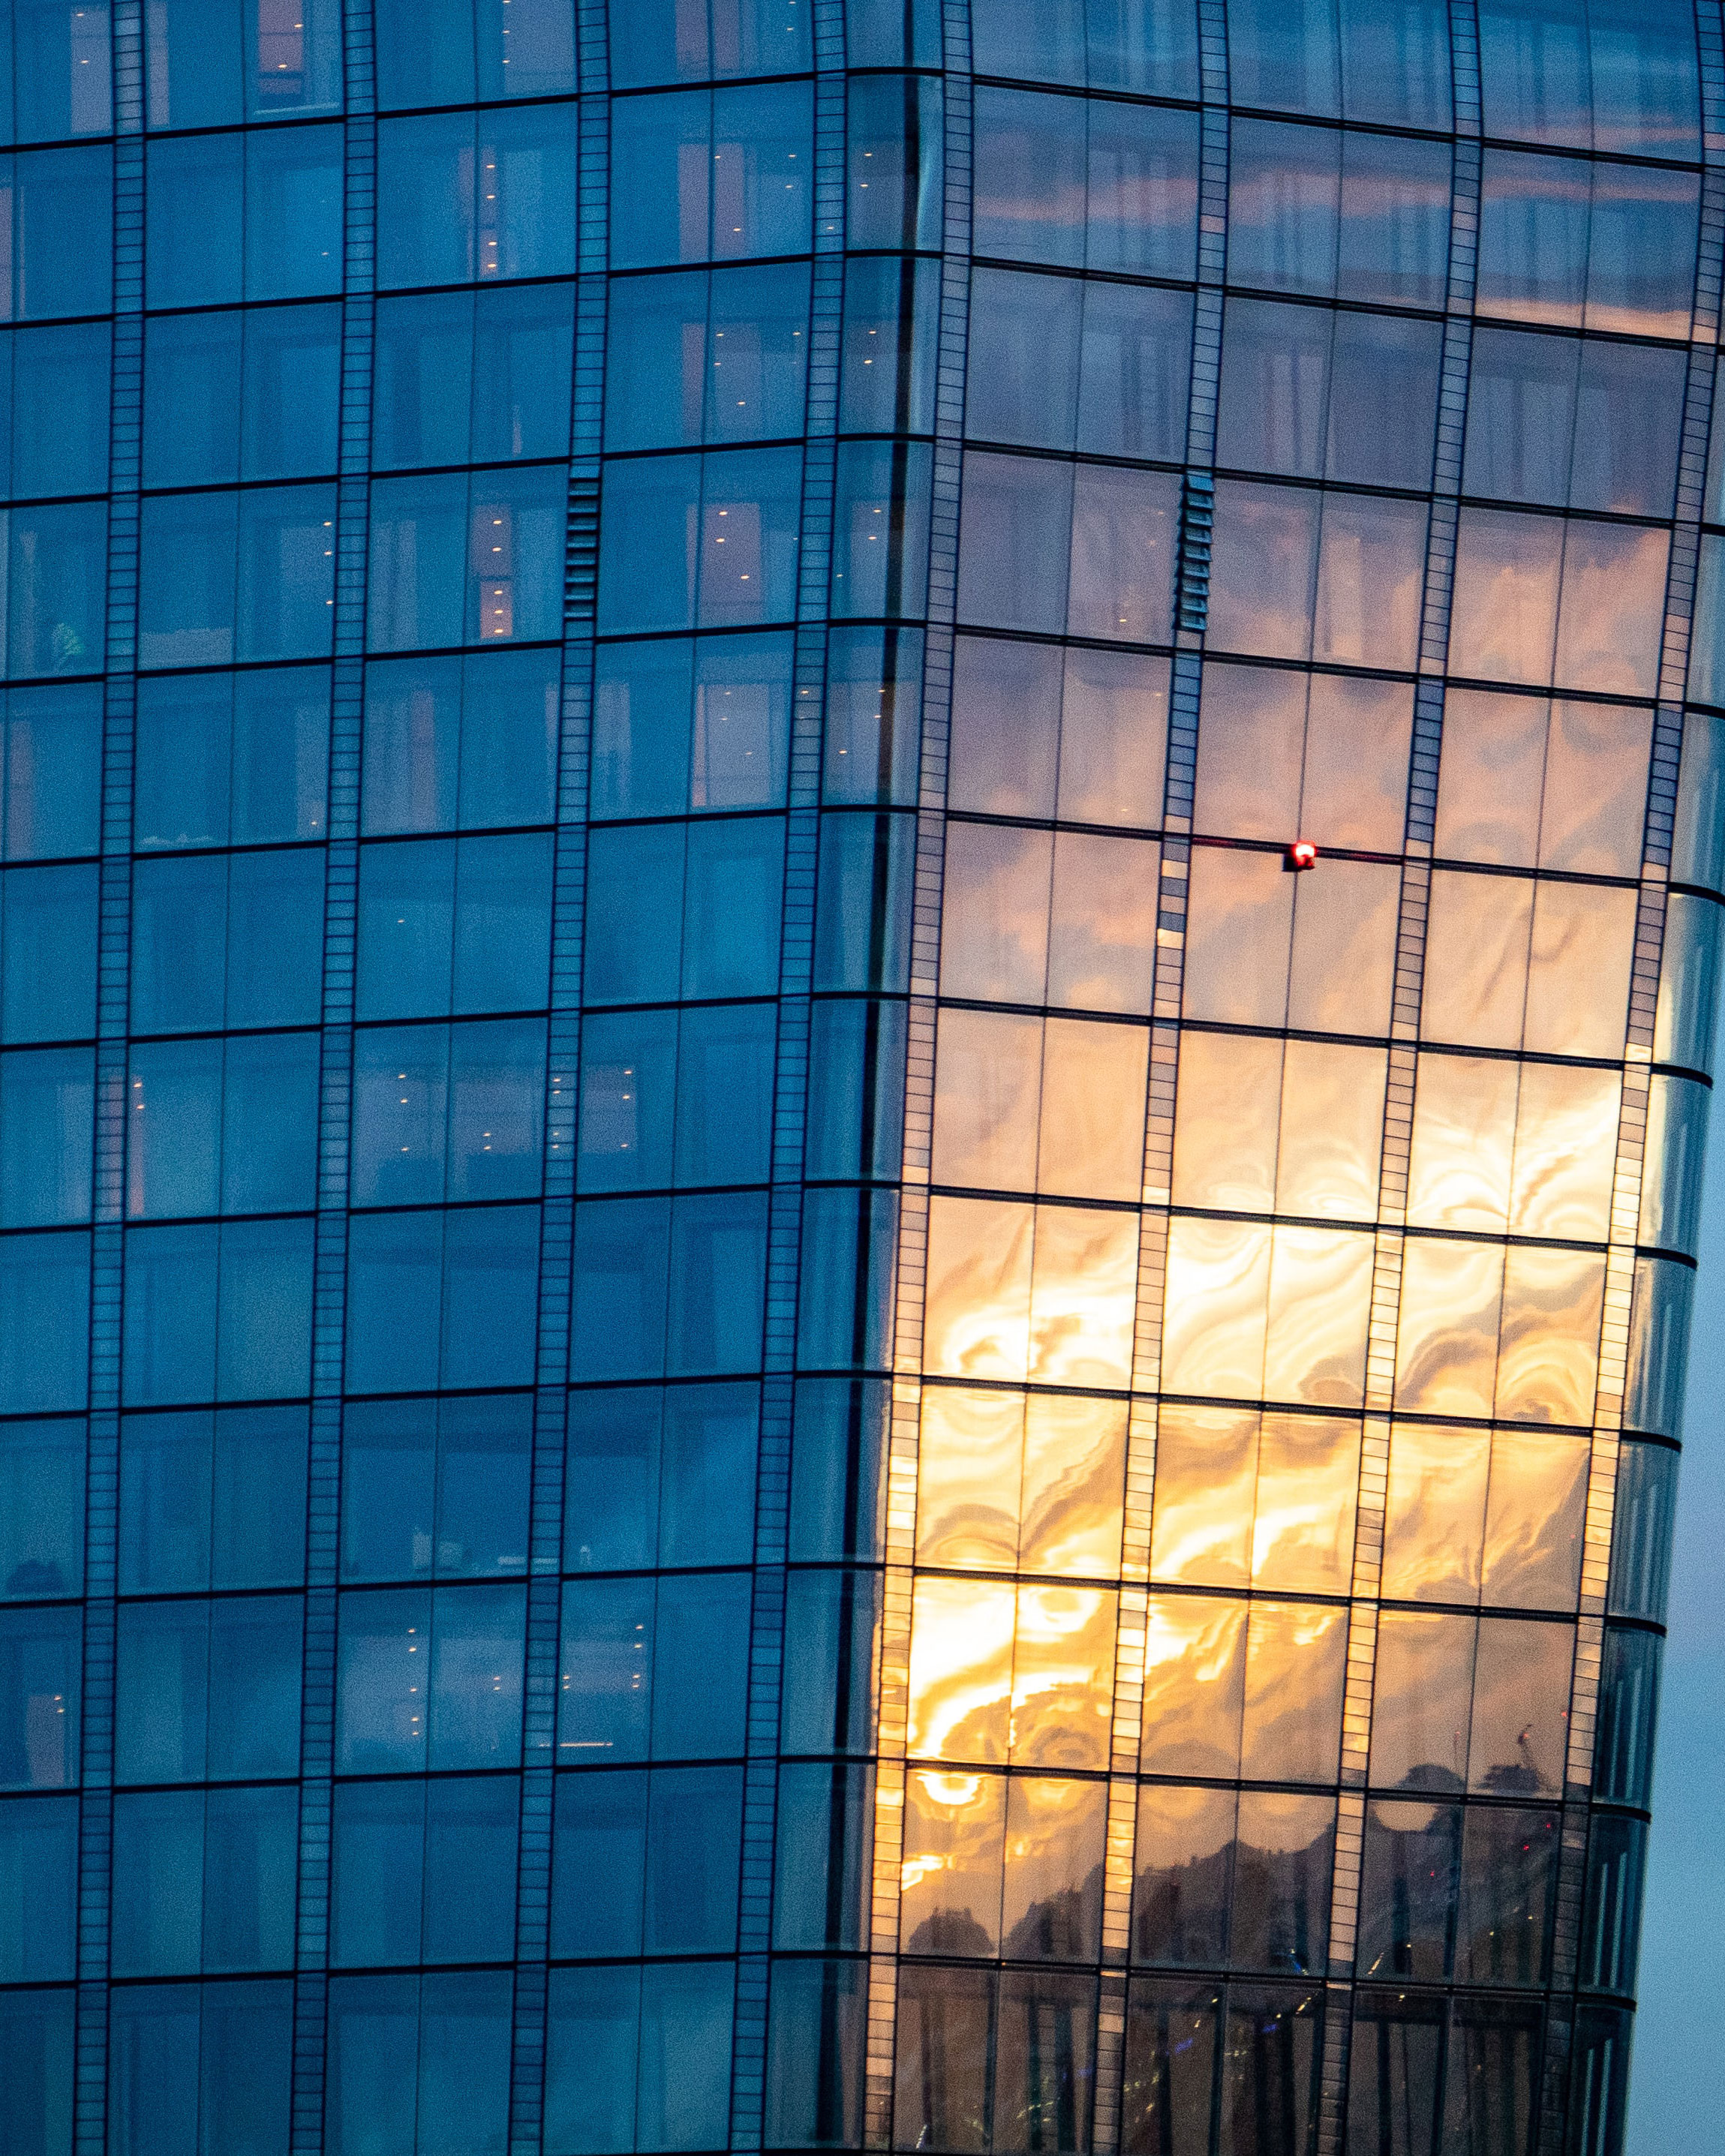 Close up of One Blackfriars building London showing windows reflections